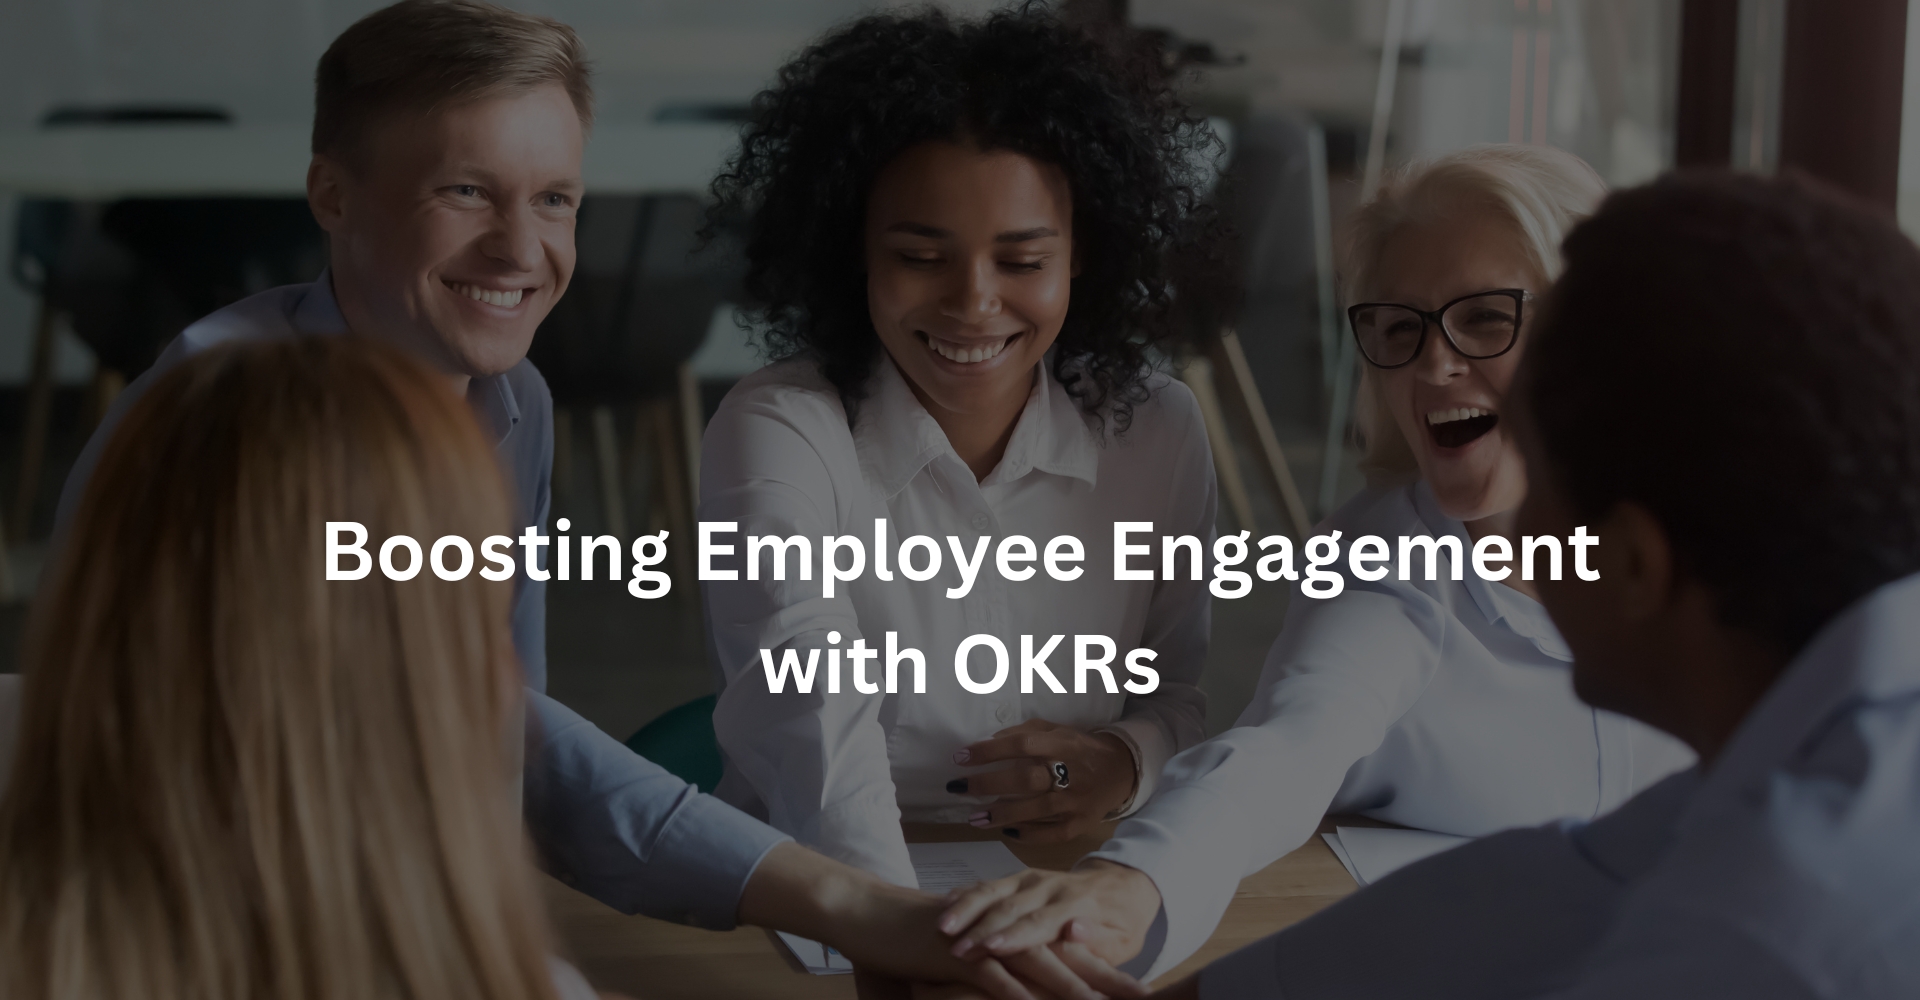 Employee Engagement with OKRs